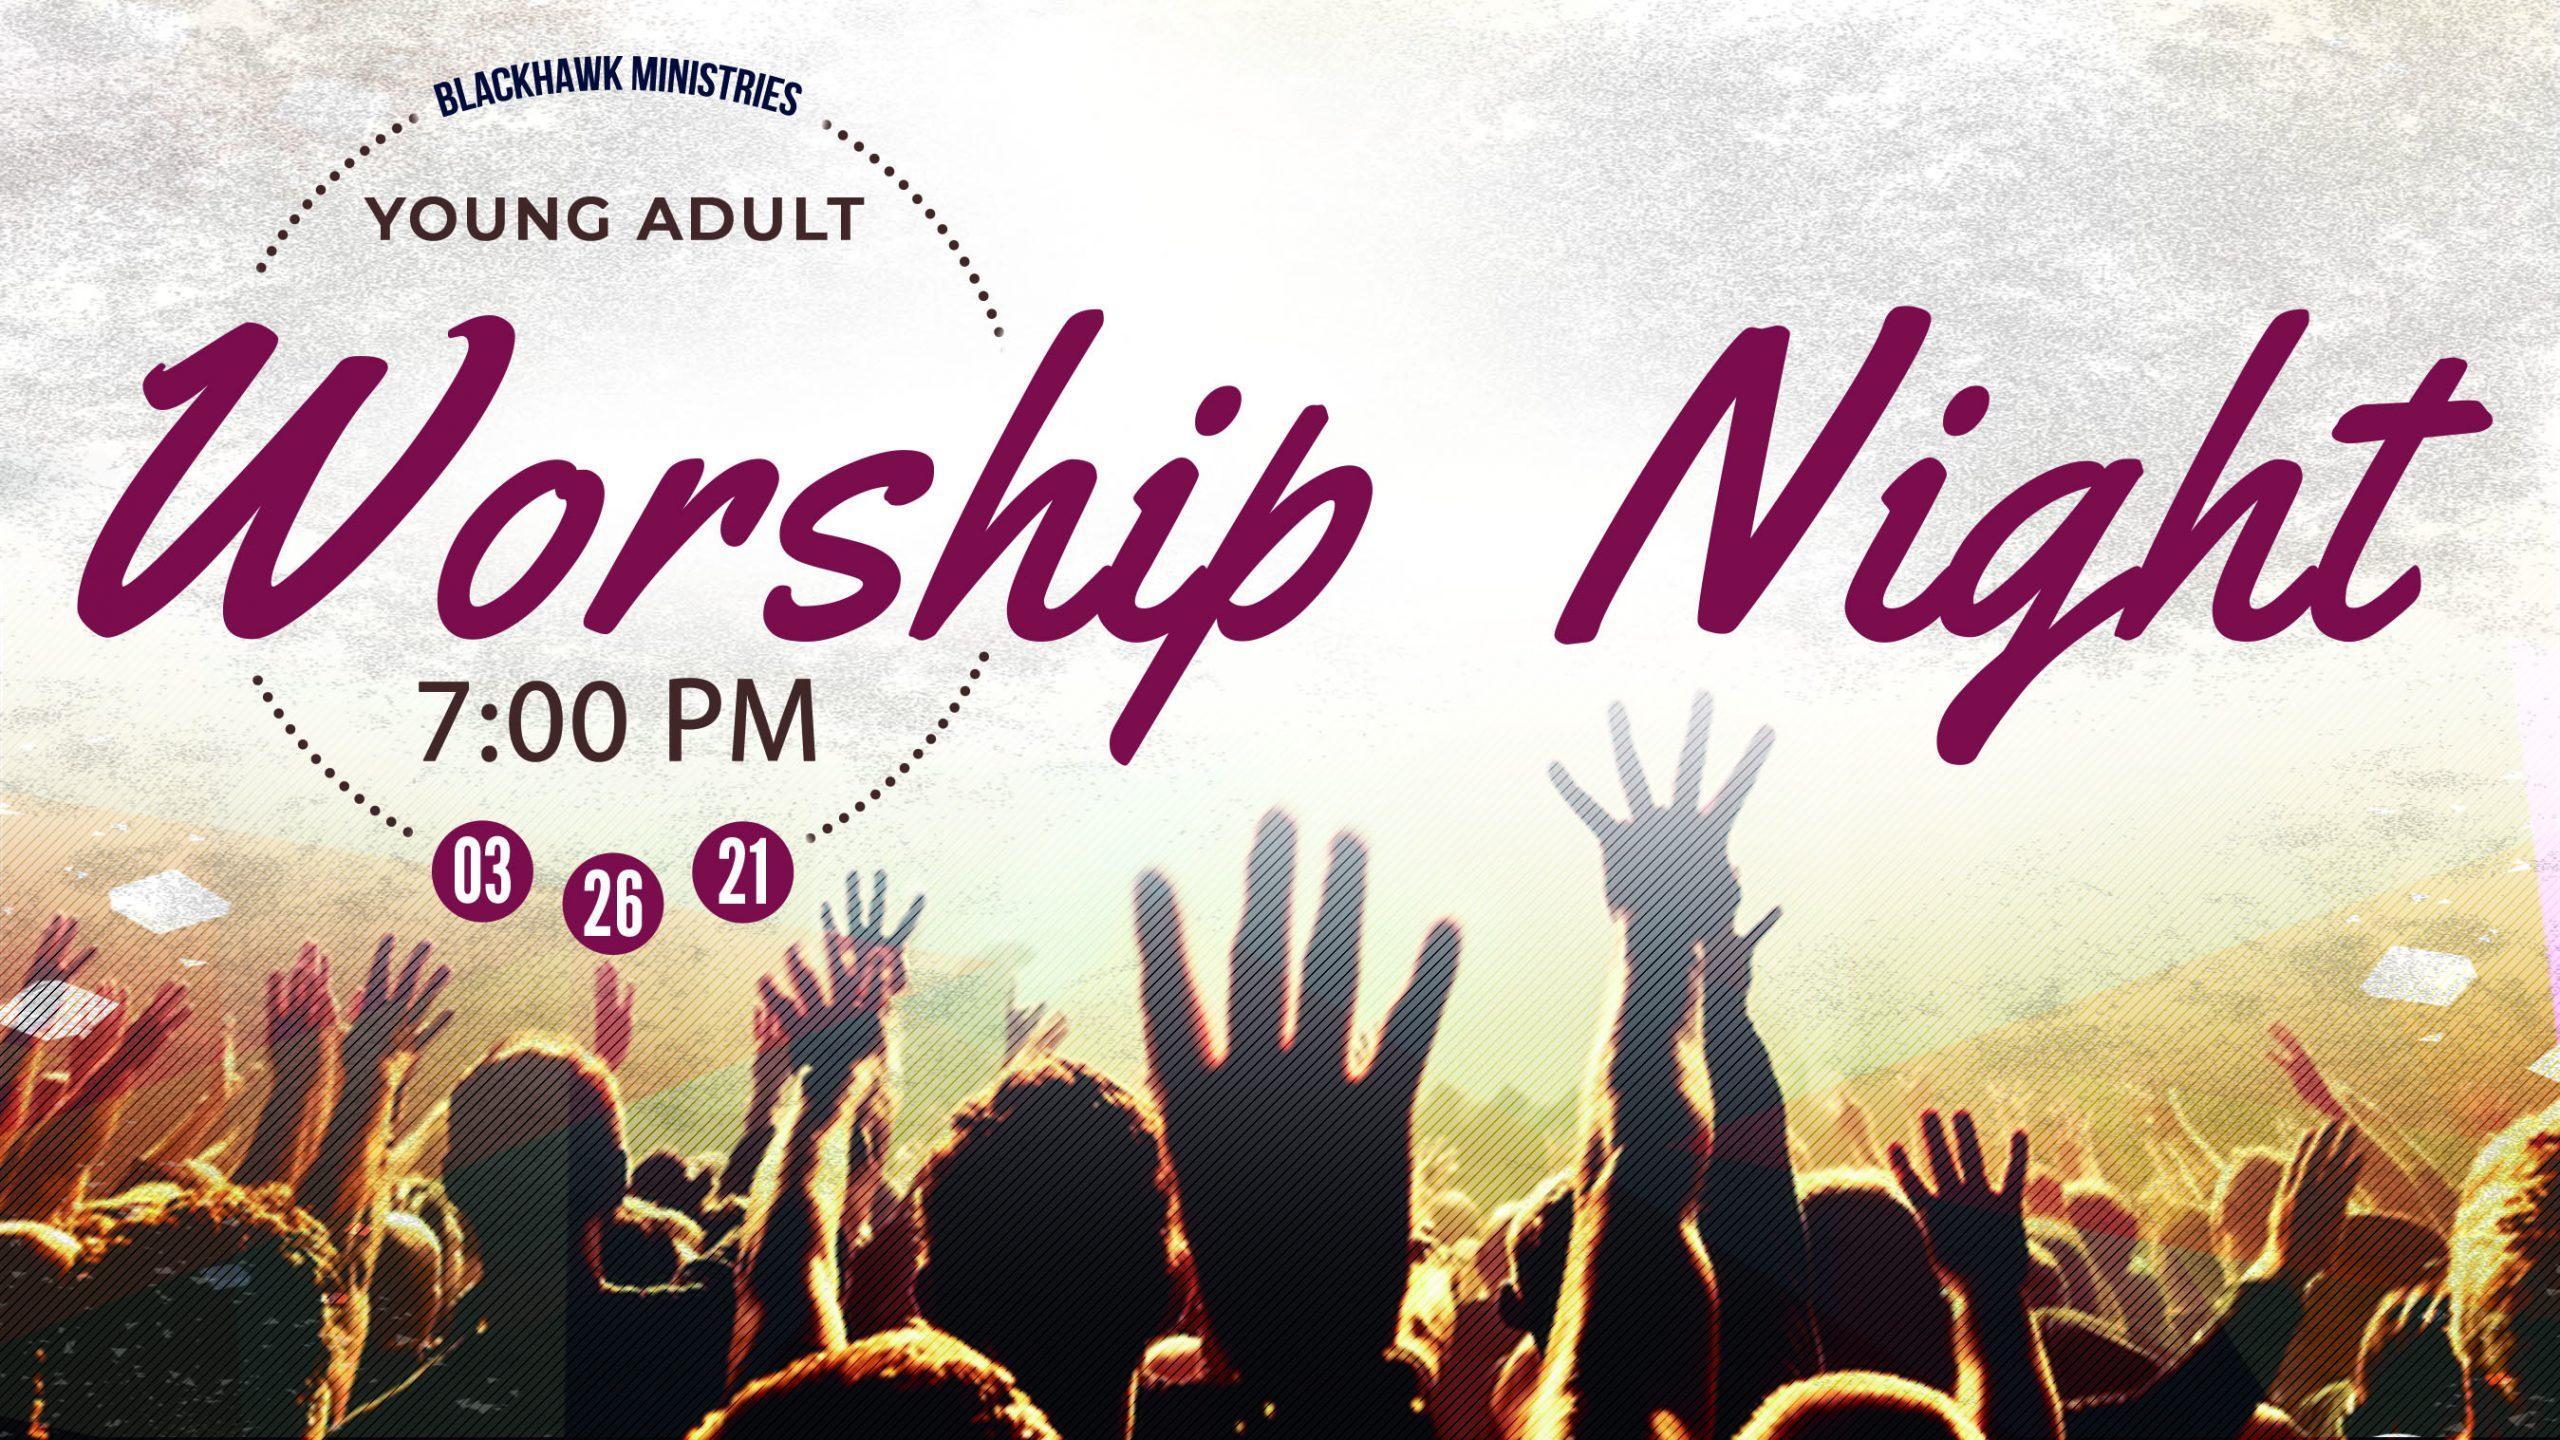 March 26 | Young Adult Worship Night